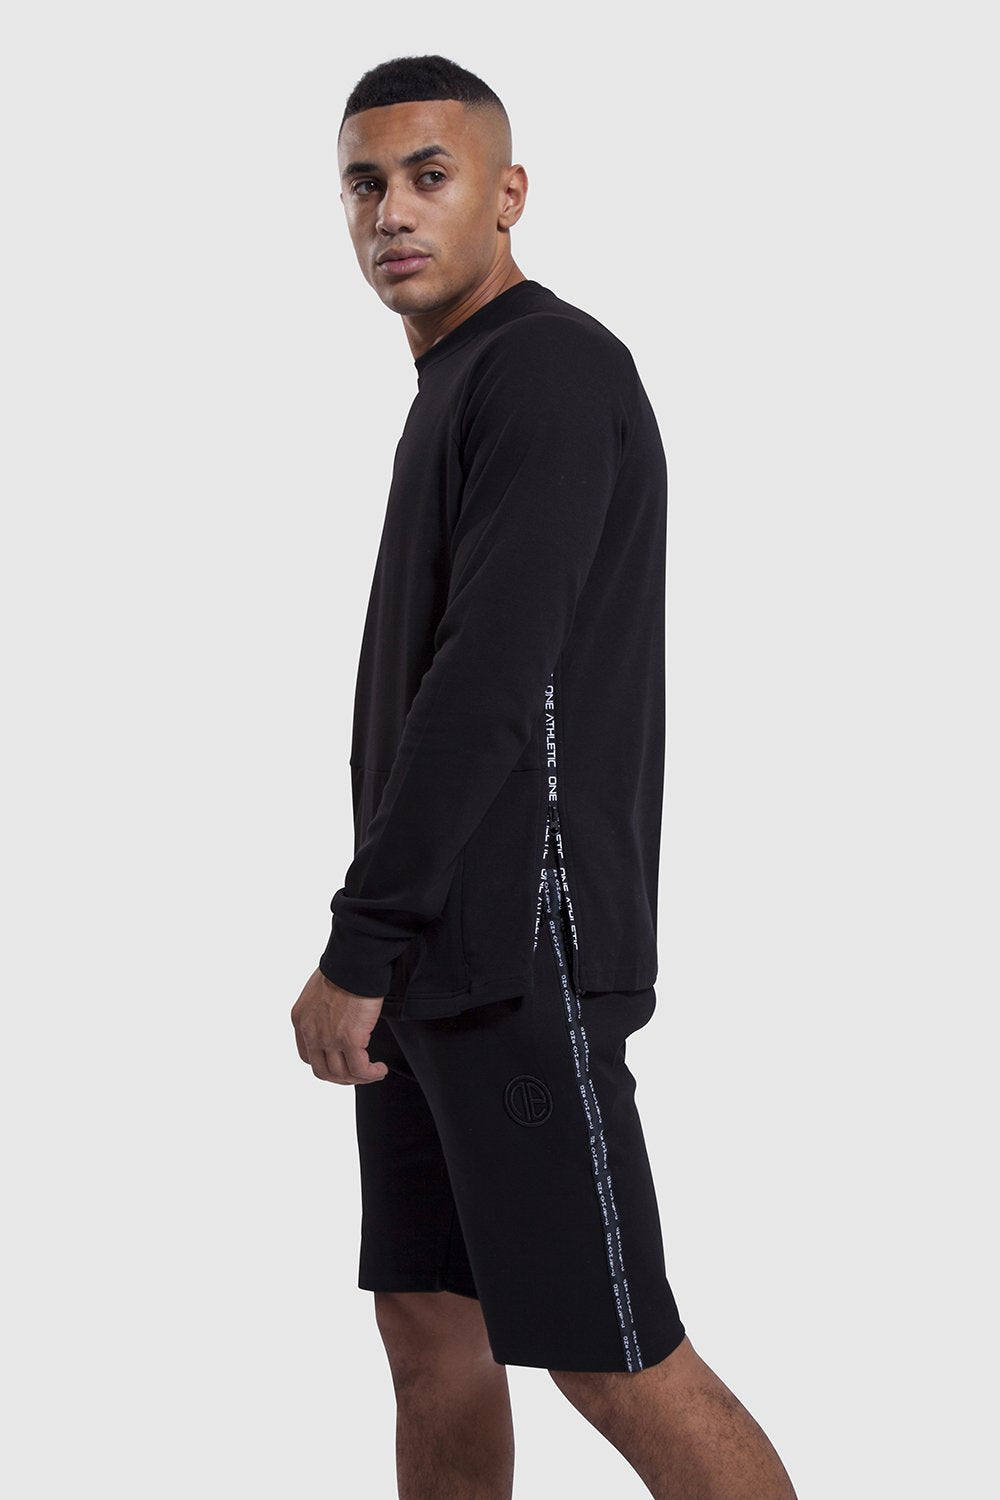 mens gym shorts and top in black - Iverson II